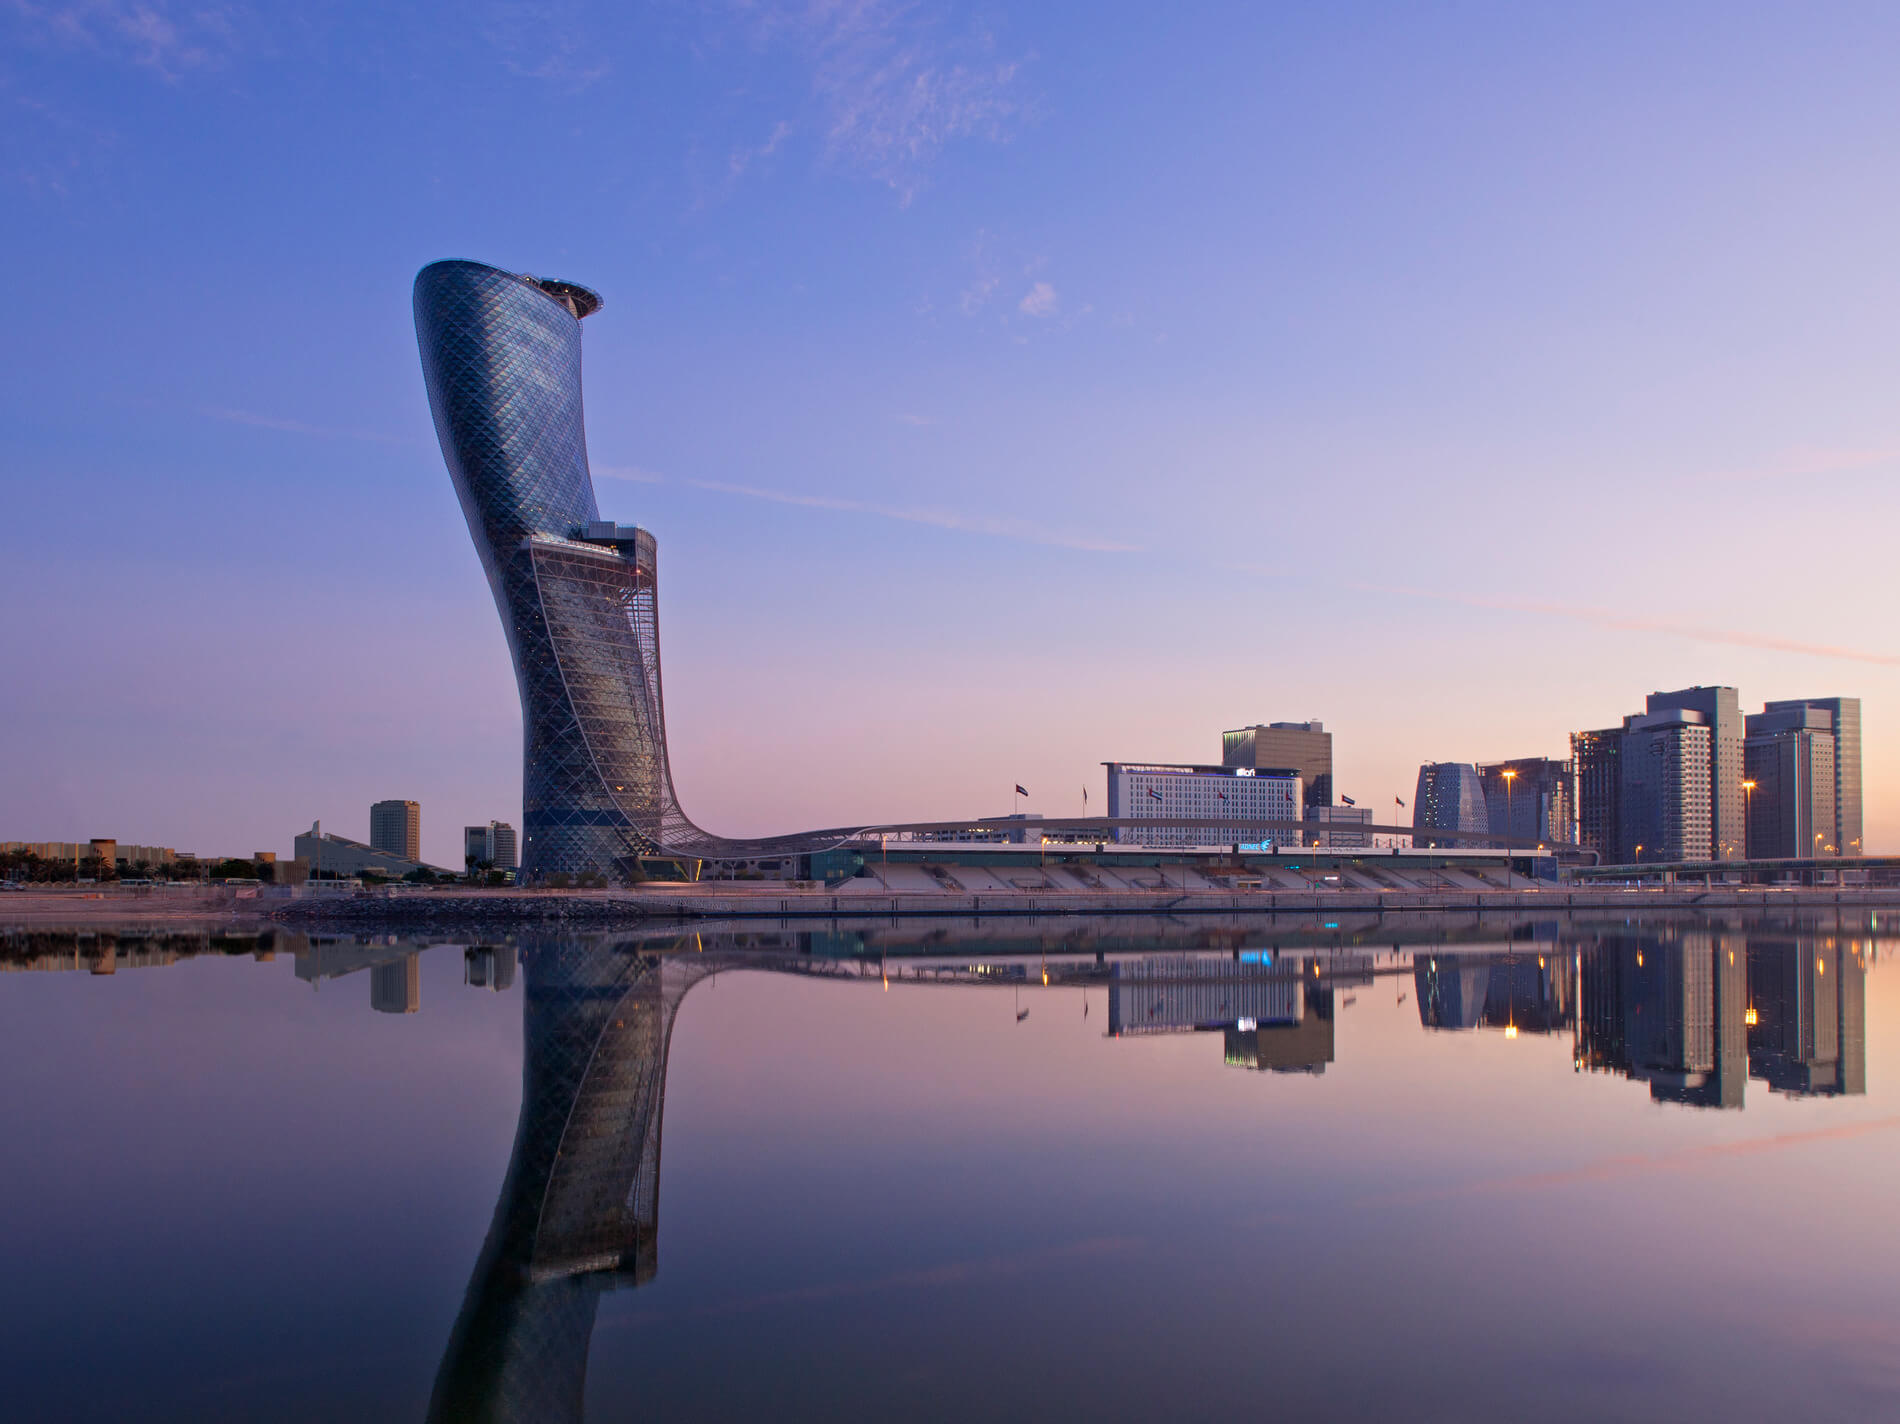 Andaz Capital Gate by Hyatt, Abu Dhabi, an architectural image captured by Gerry O’Leary at dawn